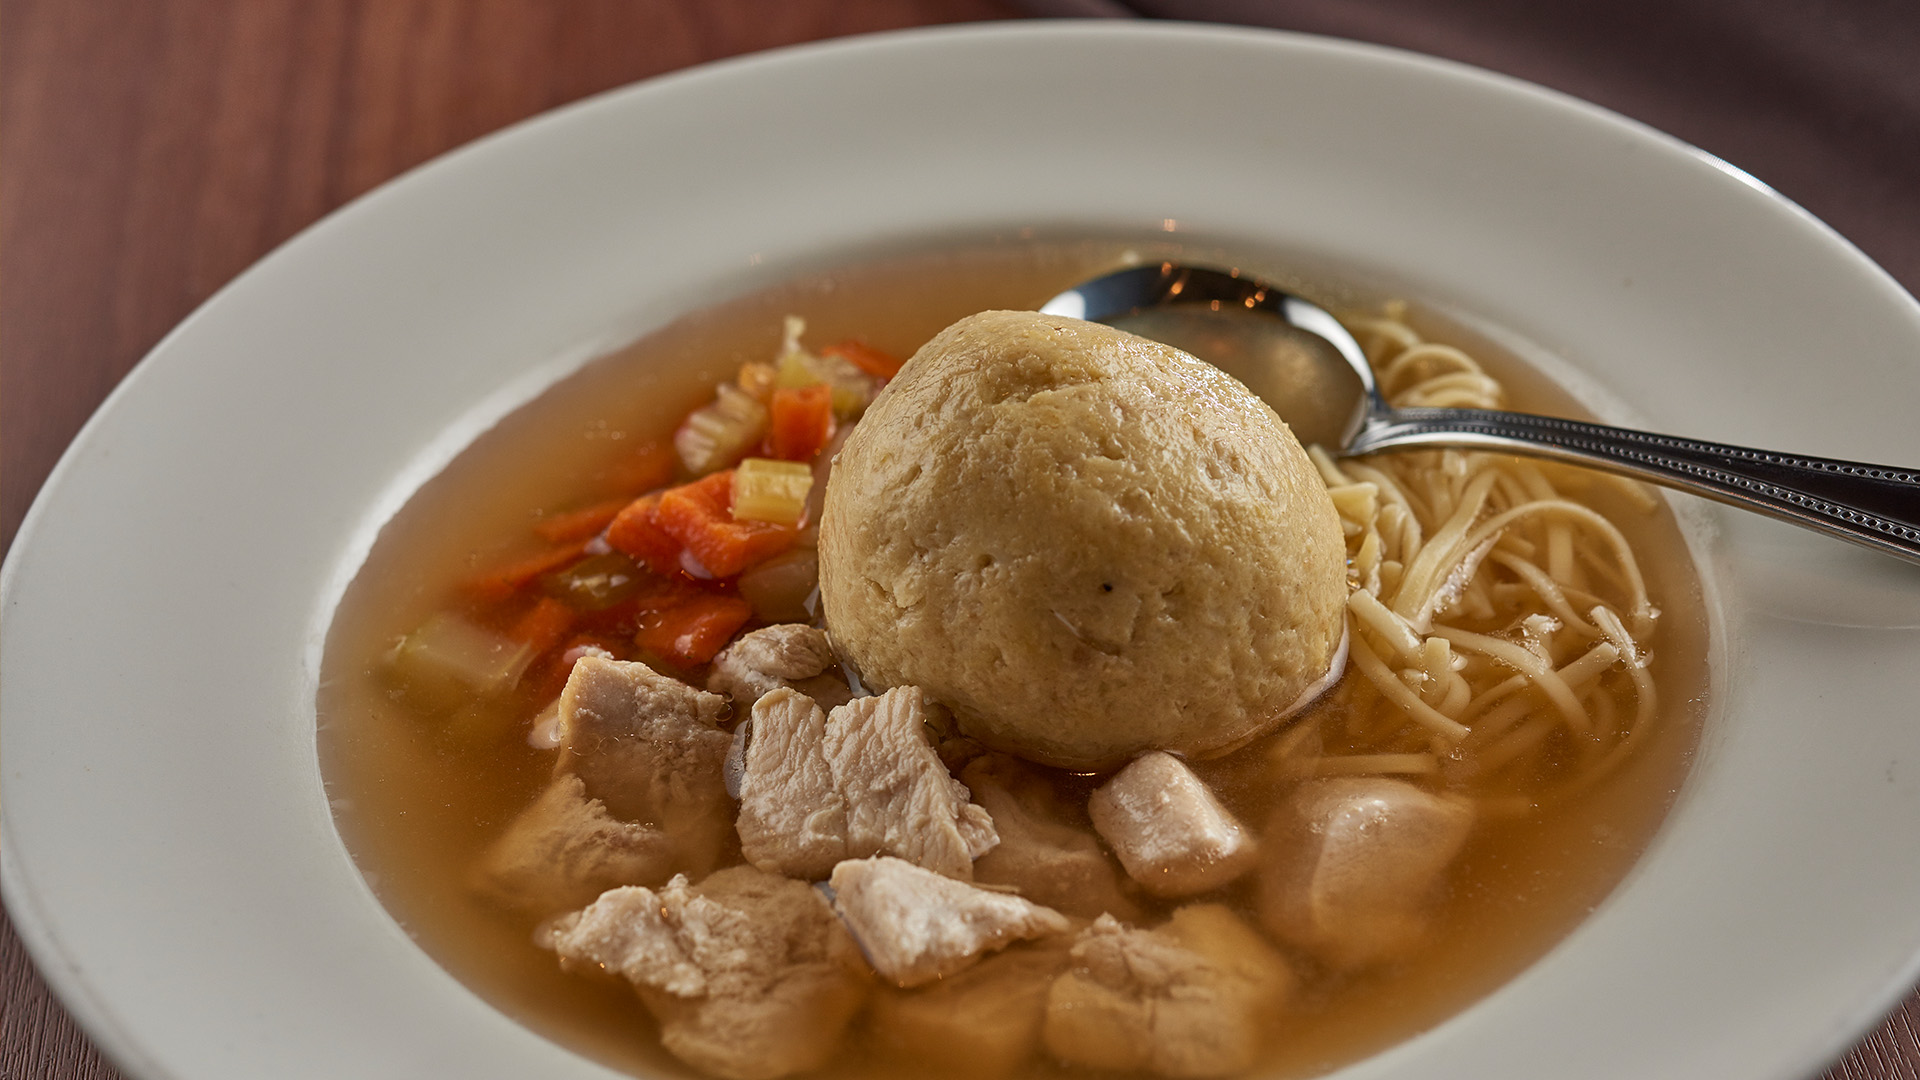 Matzo Ball Soup. Myron’s Delicatessen® doles out an extra helping of New York culture complete with humor, artwork, and music along with the best corned beef, pastrami, and classic delicatessen fare. You’ll get your fill of fun and food, guaranteed. Find all the Myron Cohen slogans that decorate the delicatessen and the waitstaff’s uniforms, including his famous “Everybody gotta be someplace” and “It’s not a question."